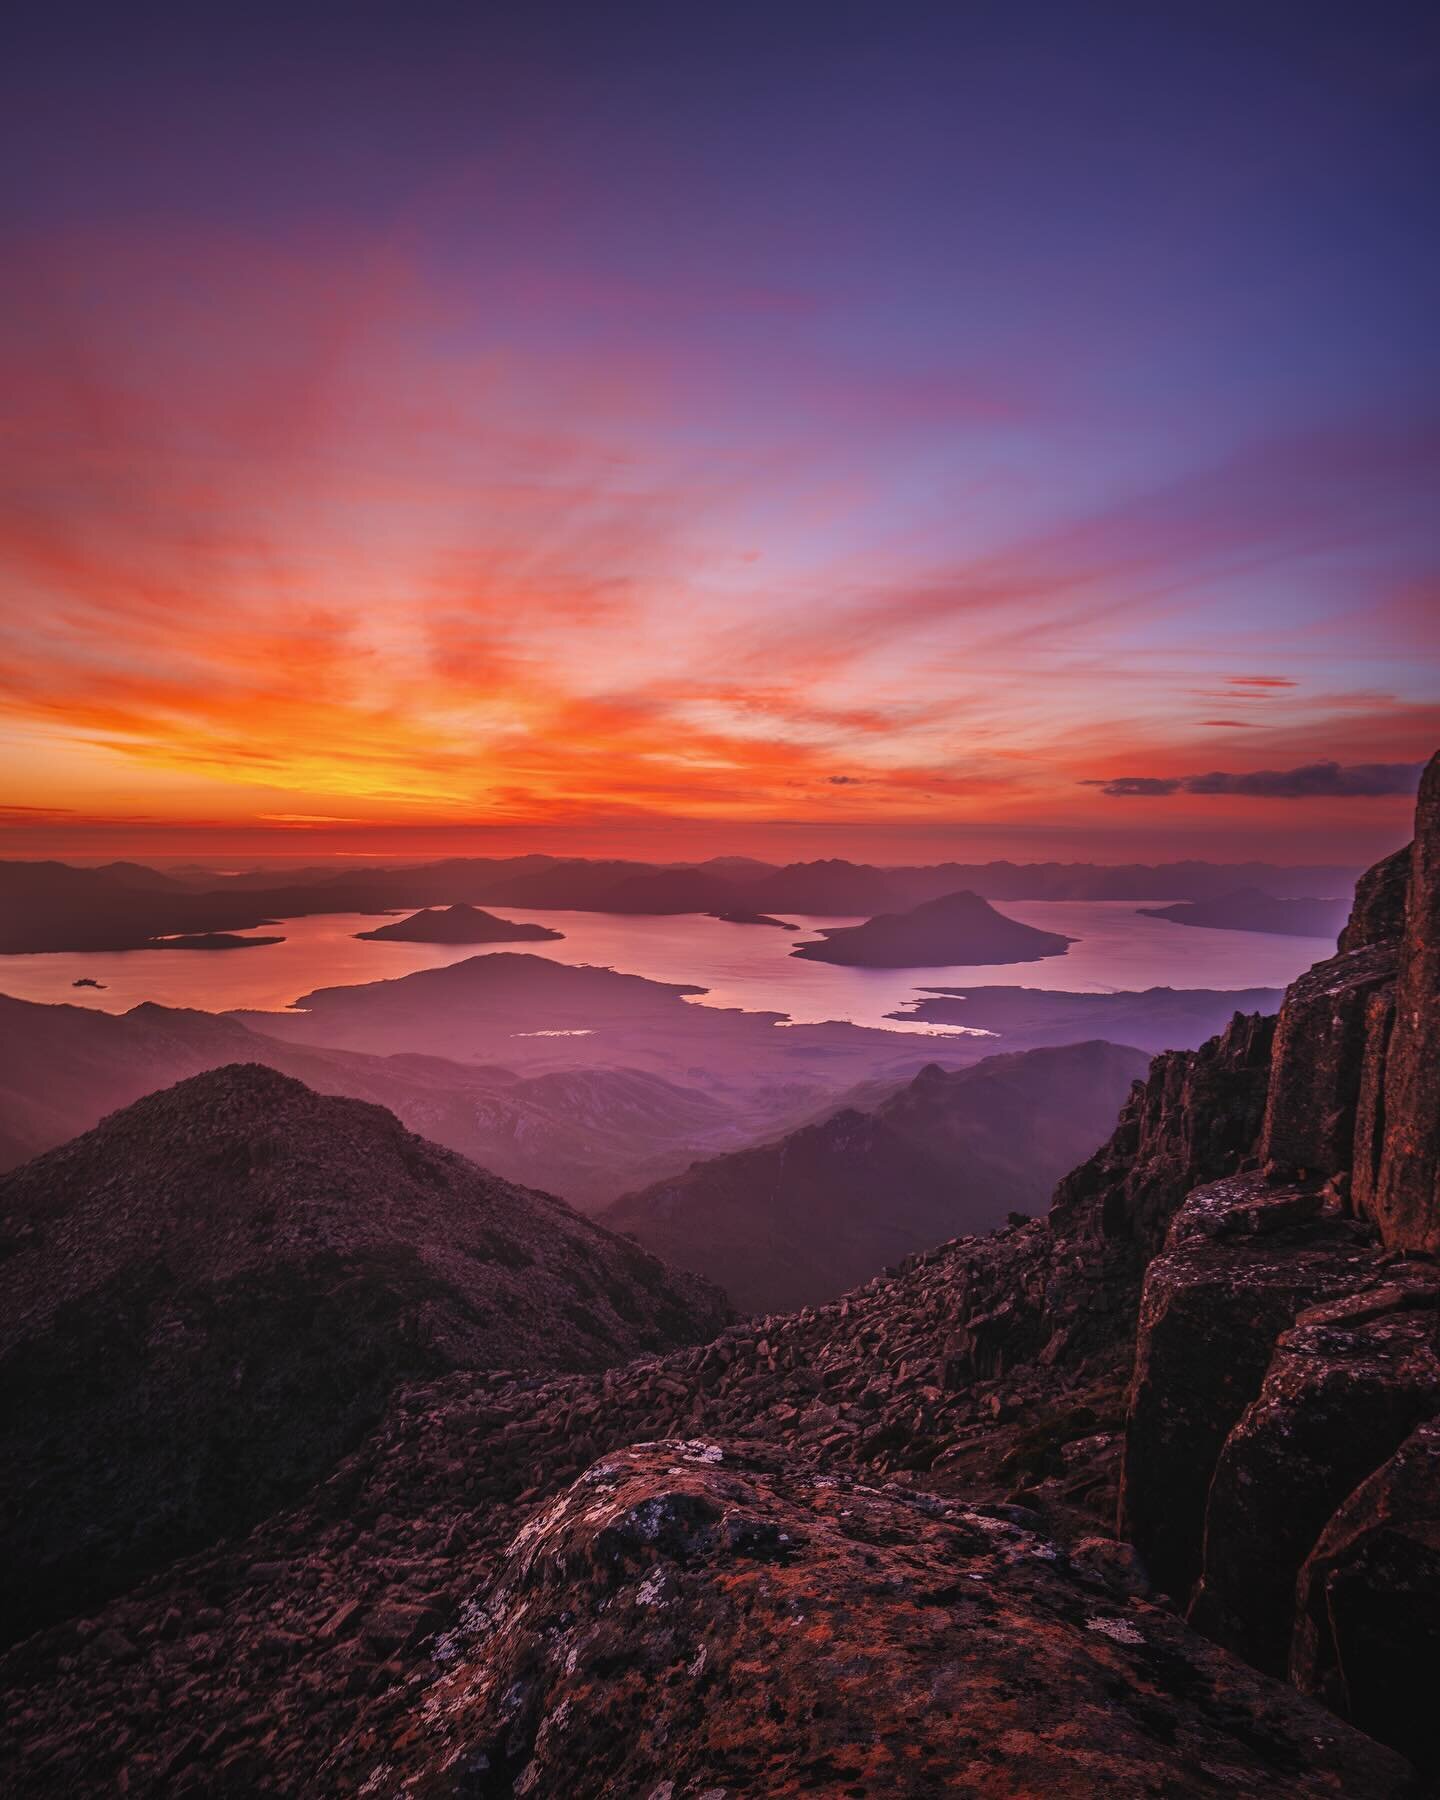 Sunset 1,423m high on Mount Anne in Tassie&rsquo;s Southwest National Park. An incredible view from the highest point of the region with such an impressive view of Lake Pedder below! The hike to reach this pinnacle was undoubtedly one of the most dem